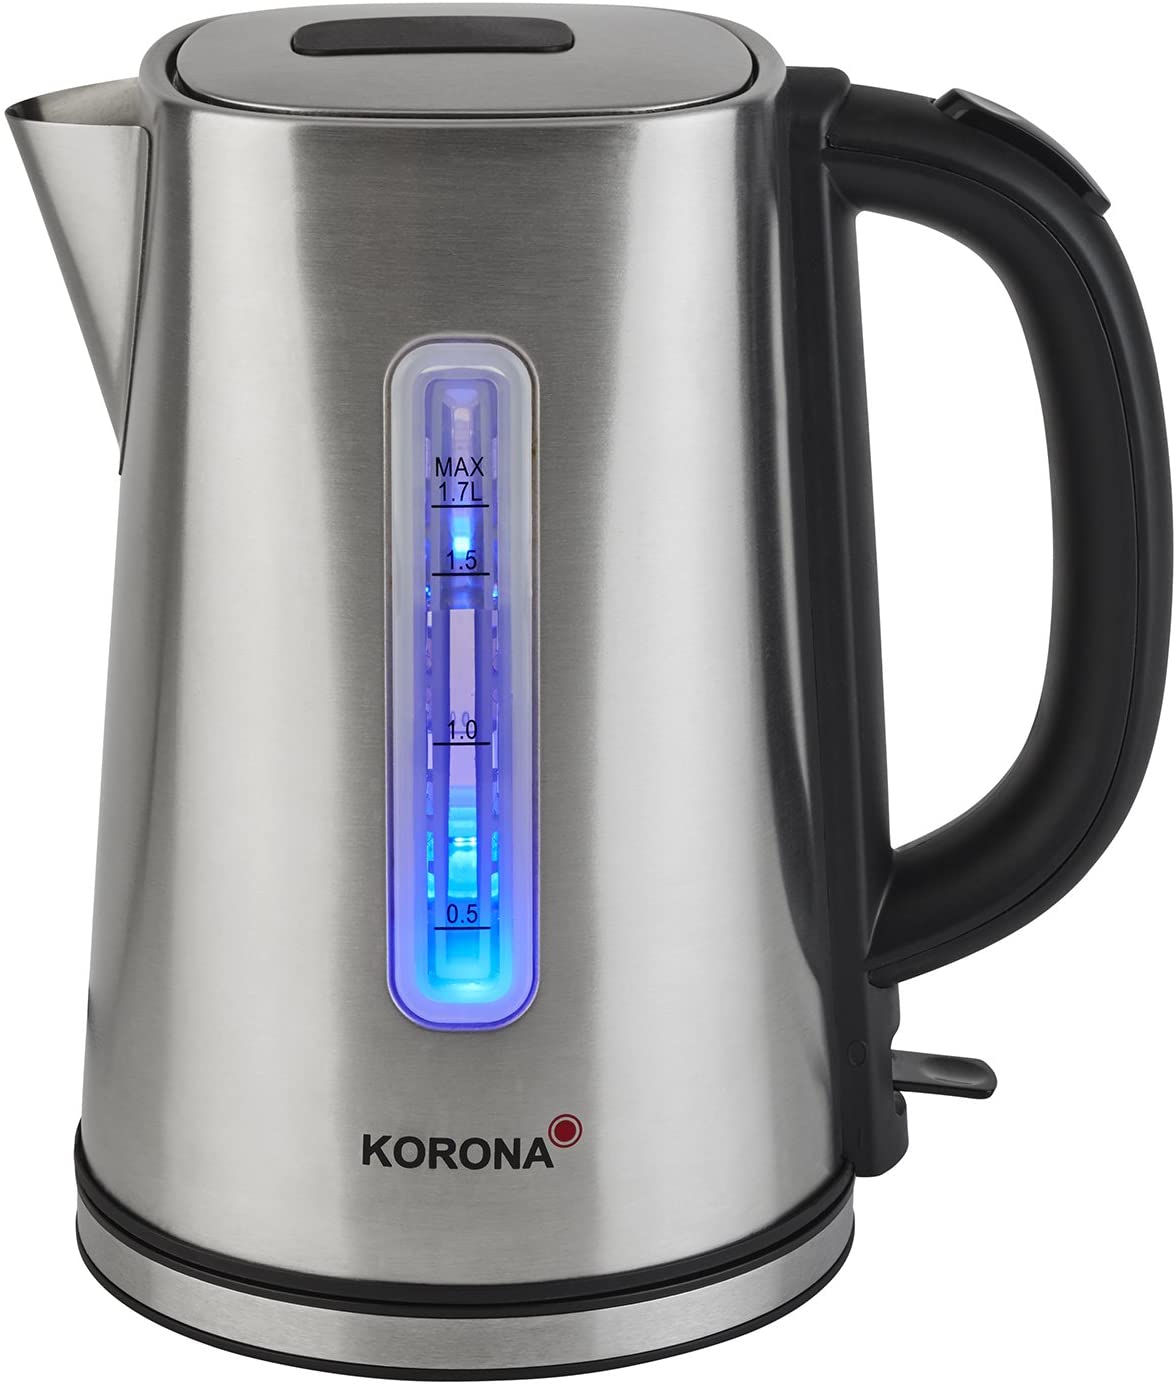 Korona 20252 Jug Kettle in Stainless Steel/Black with Lit Clear Water Level Indicator